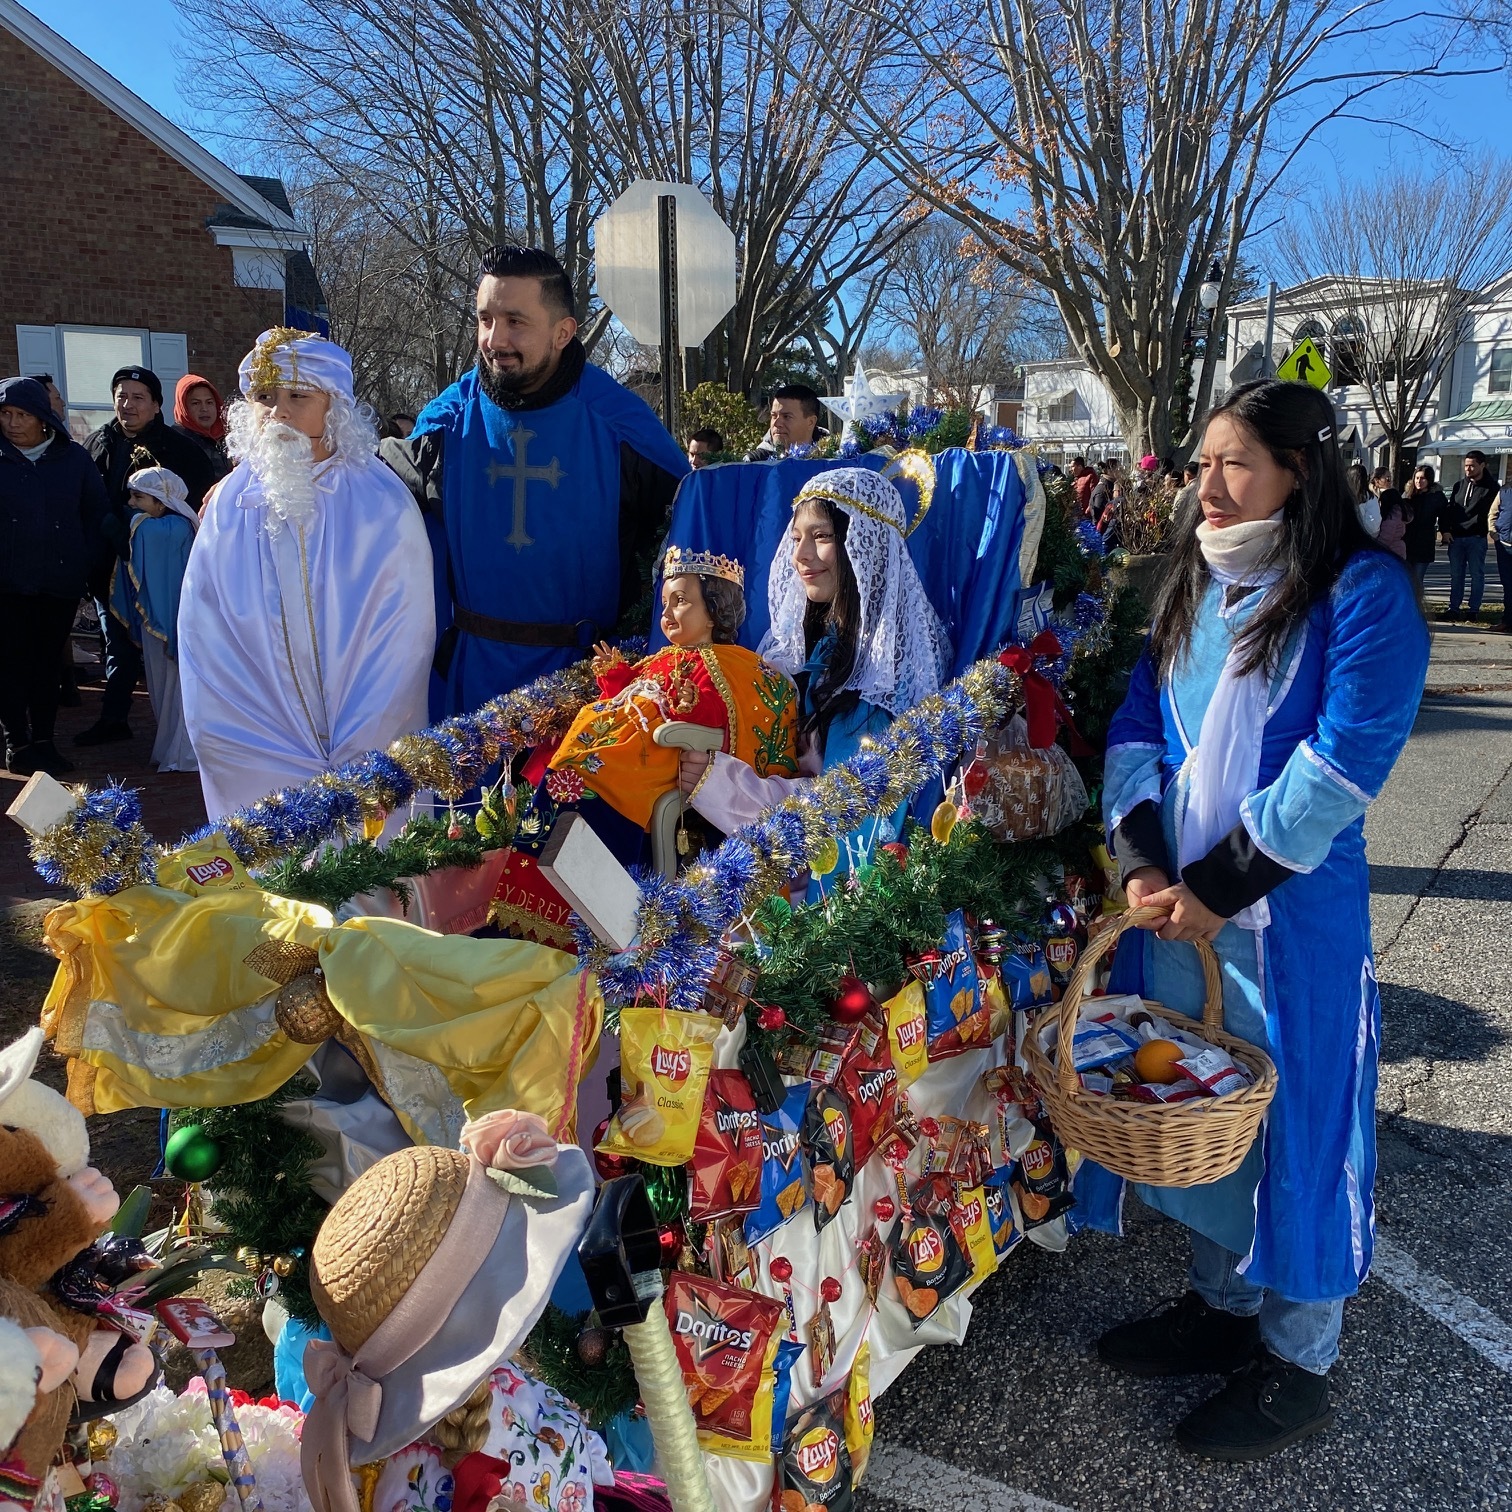 A large crowd gathered in East Hampton Village for Three Kings Day, also known as Epiphany, which celebrates the arrival in Bethlehem of the Three Wise Men bearing gifts for the baby Jesus. Many participants wore costumes and some children were dressed as baby Jesus. After the gathering off Main Street, the group paraded from there to the Most Holy Trinity Church. KIM COVELL